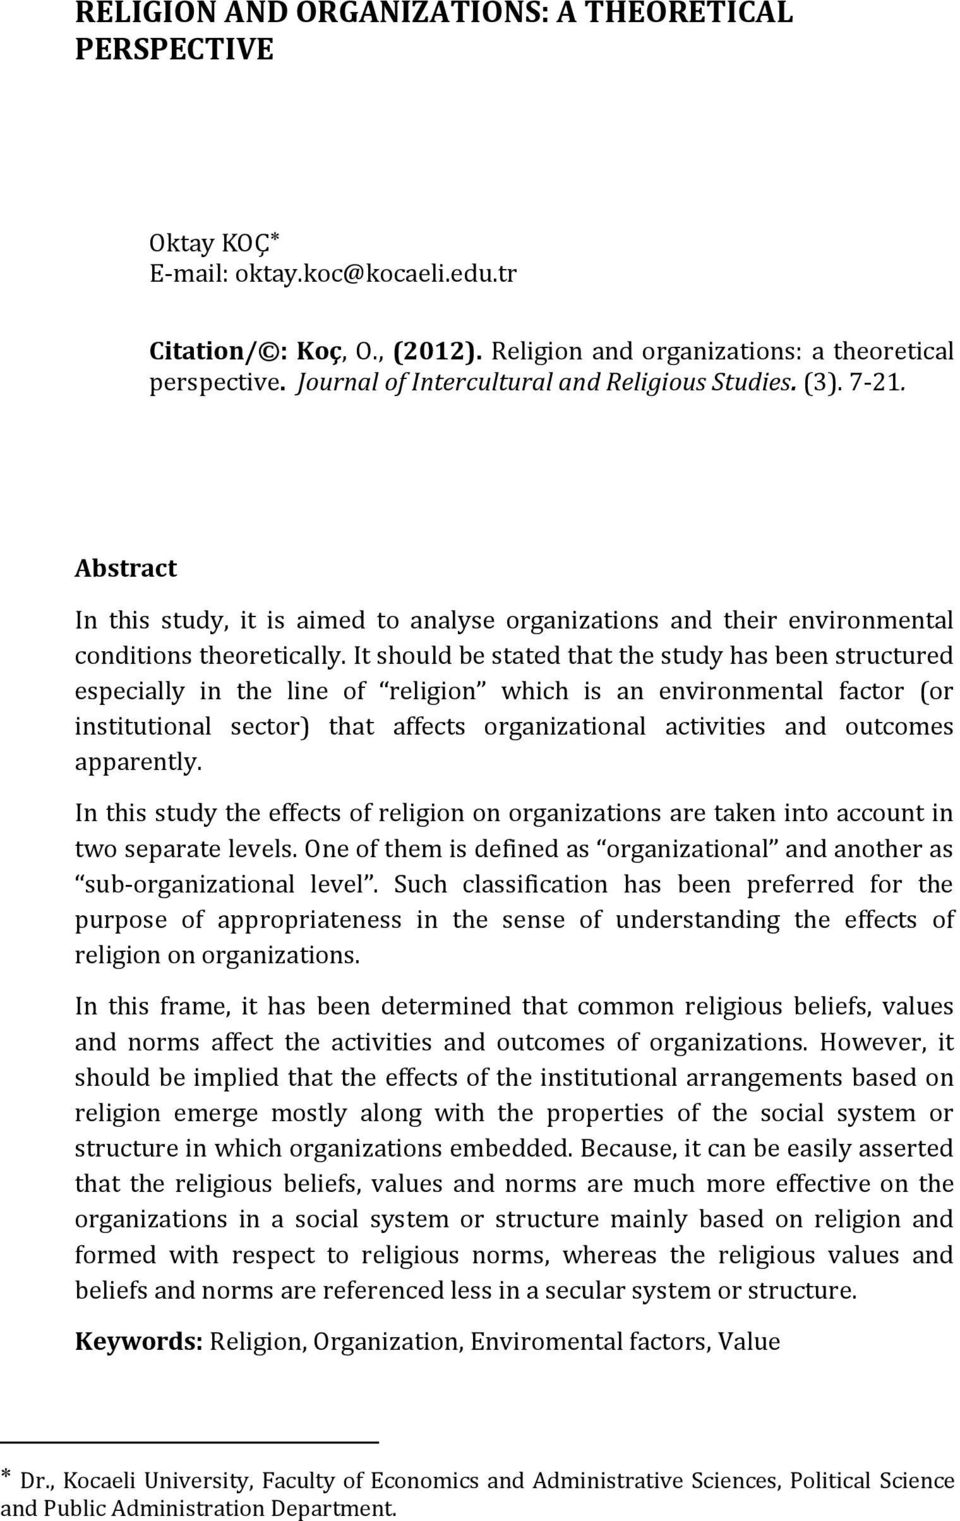 It should be stated that the study has been structured especially in the line of religion which is an environmental factor (or institutional sector) that affects organizational activities and